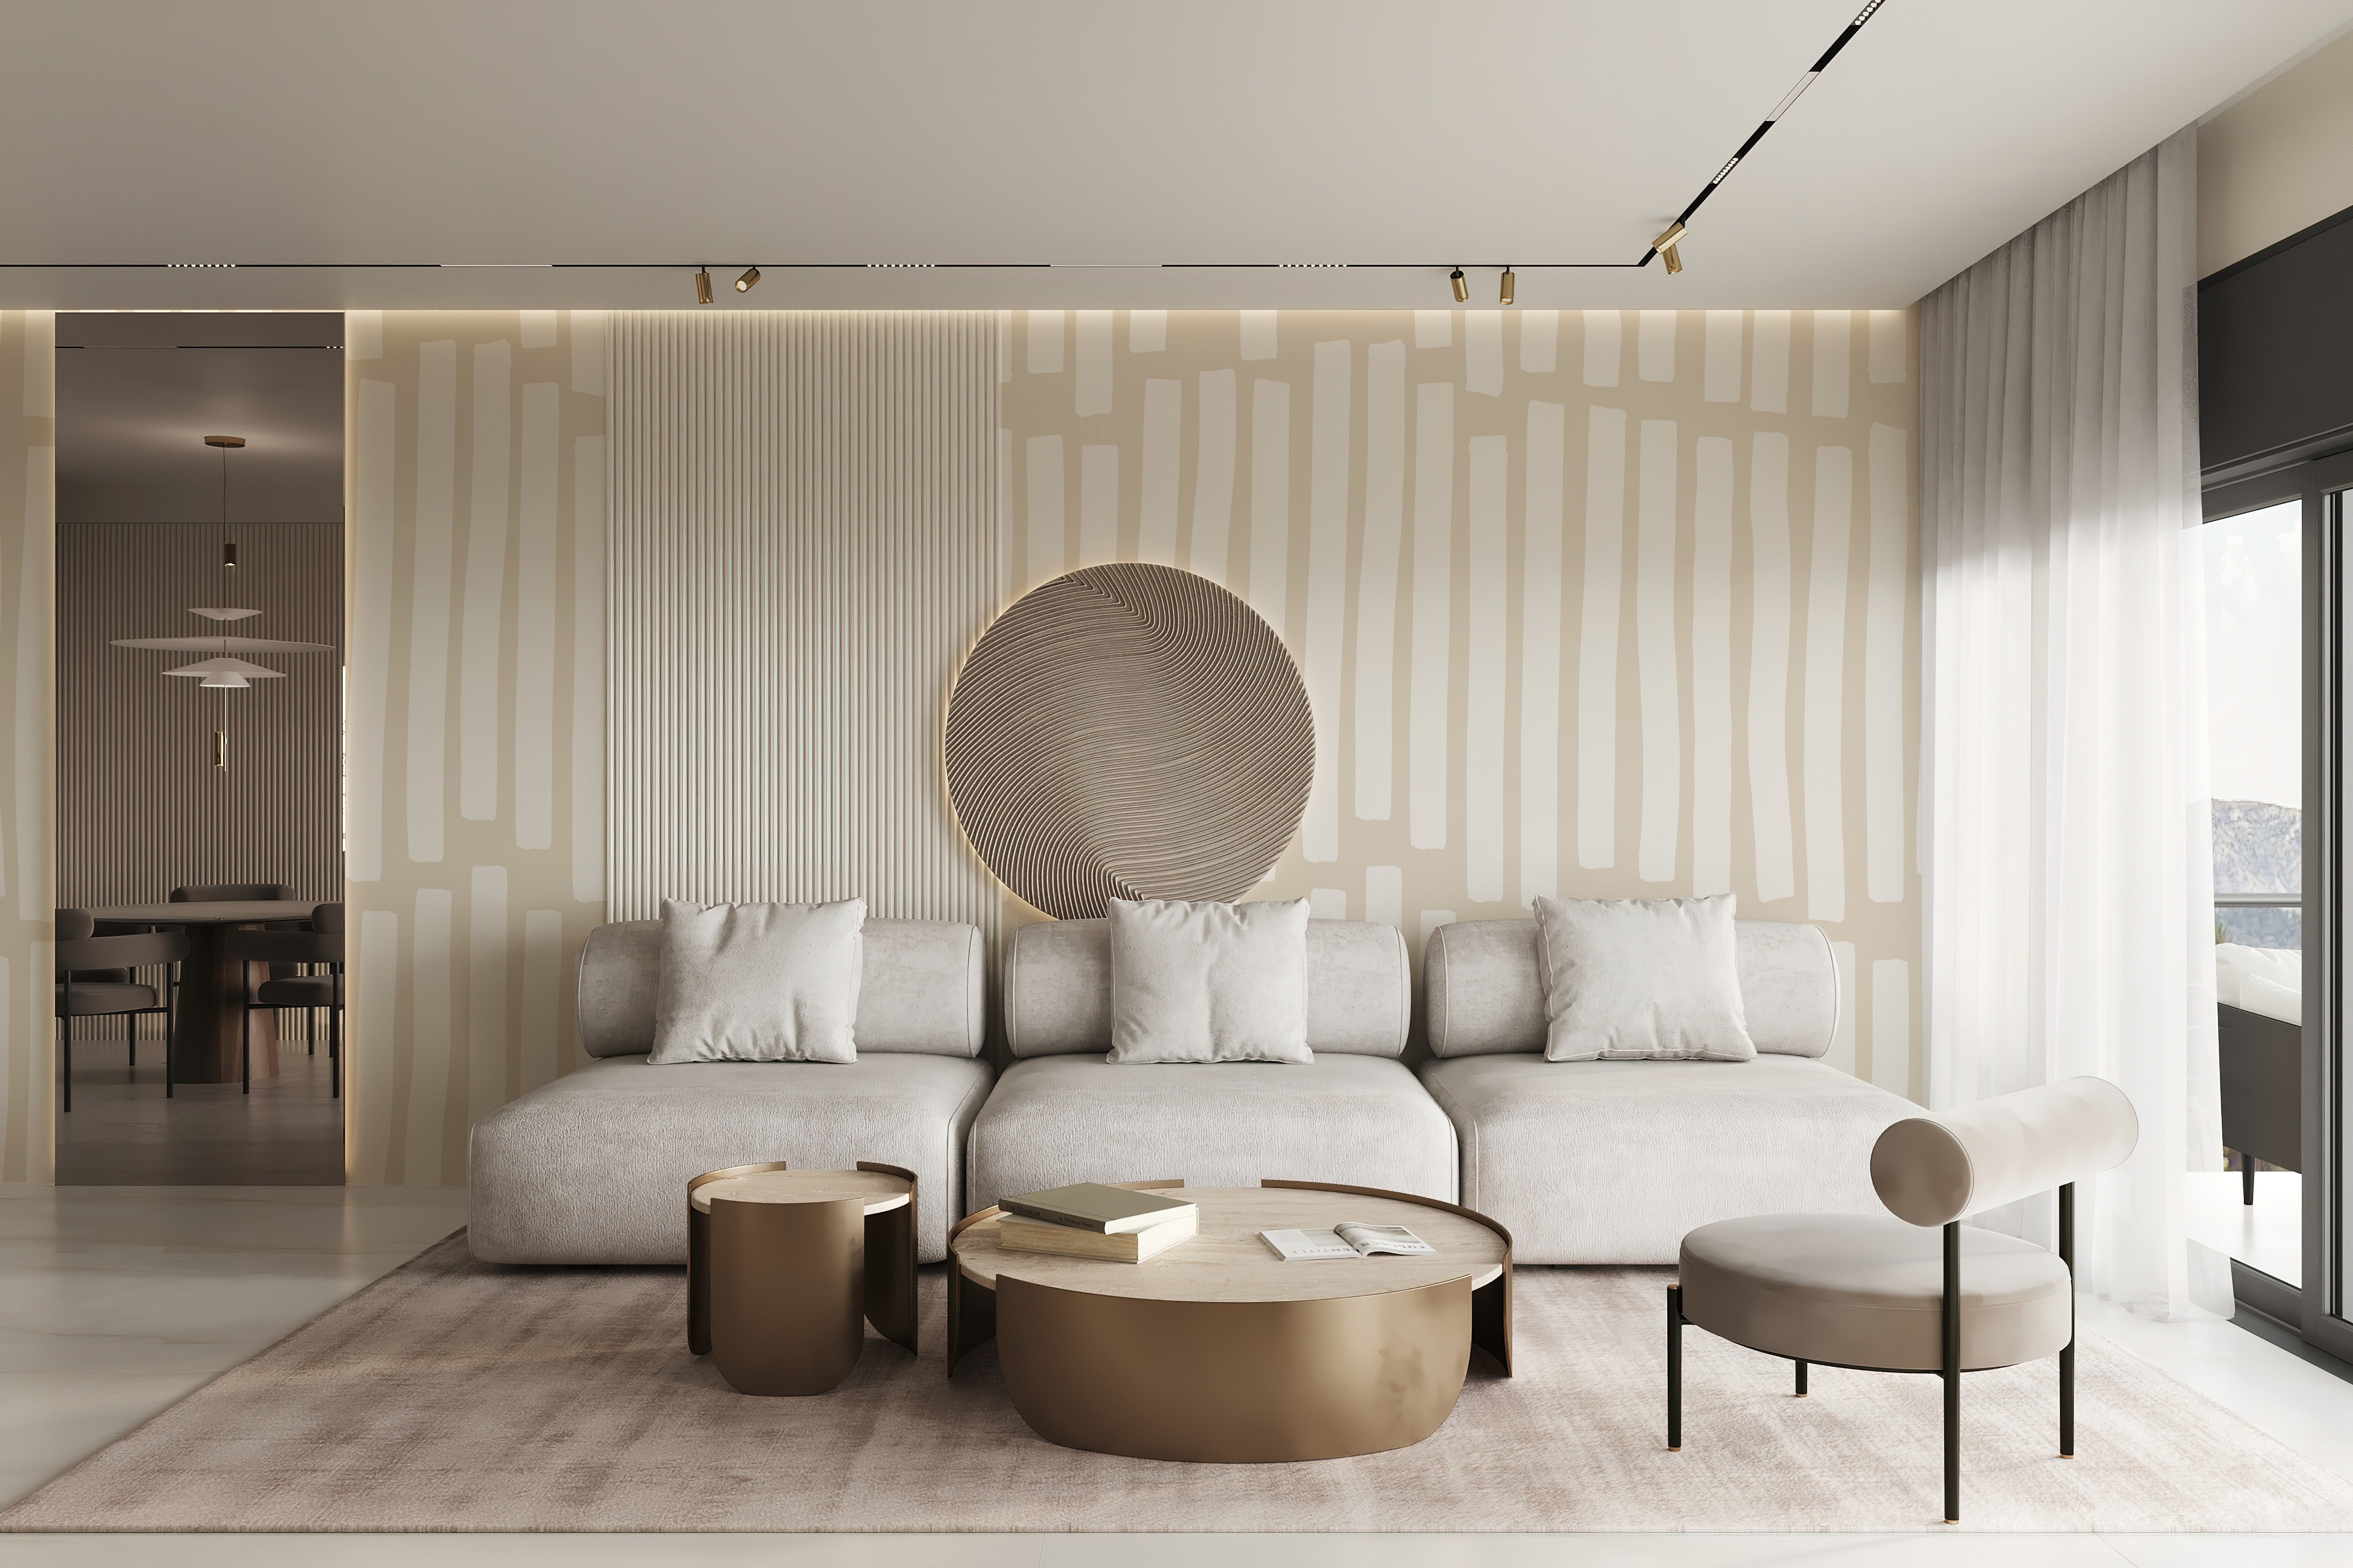 A modern living room showcasing the Boardwalk Wallpaper - 100" on the wall behind a plush gray sofa set. The decor includes a unique round mirror and a large metallic coffee table, harmonizing with the wallpaper's neutral tones to produce a refined and contemporary look.